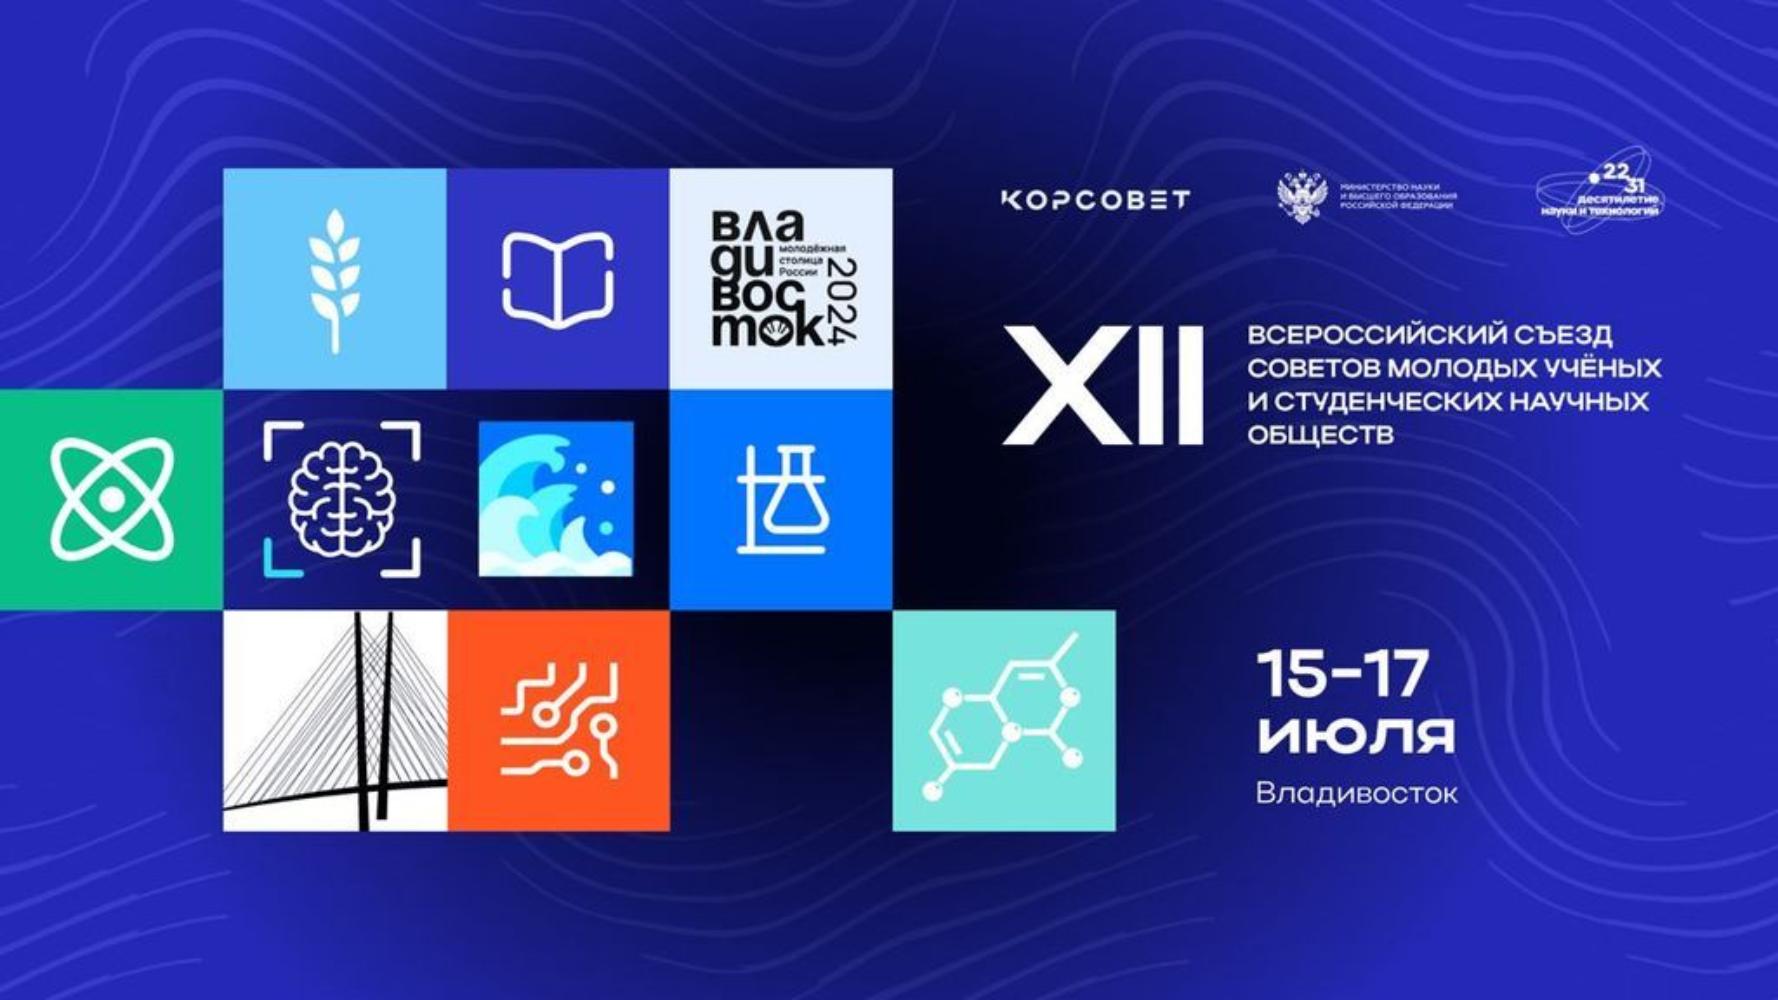 XII Russian Congress of Councils of Young Scientists and Student Scientific Societies